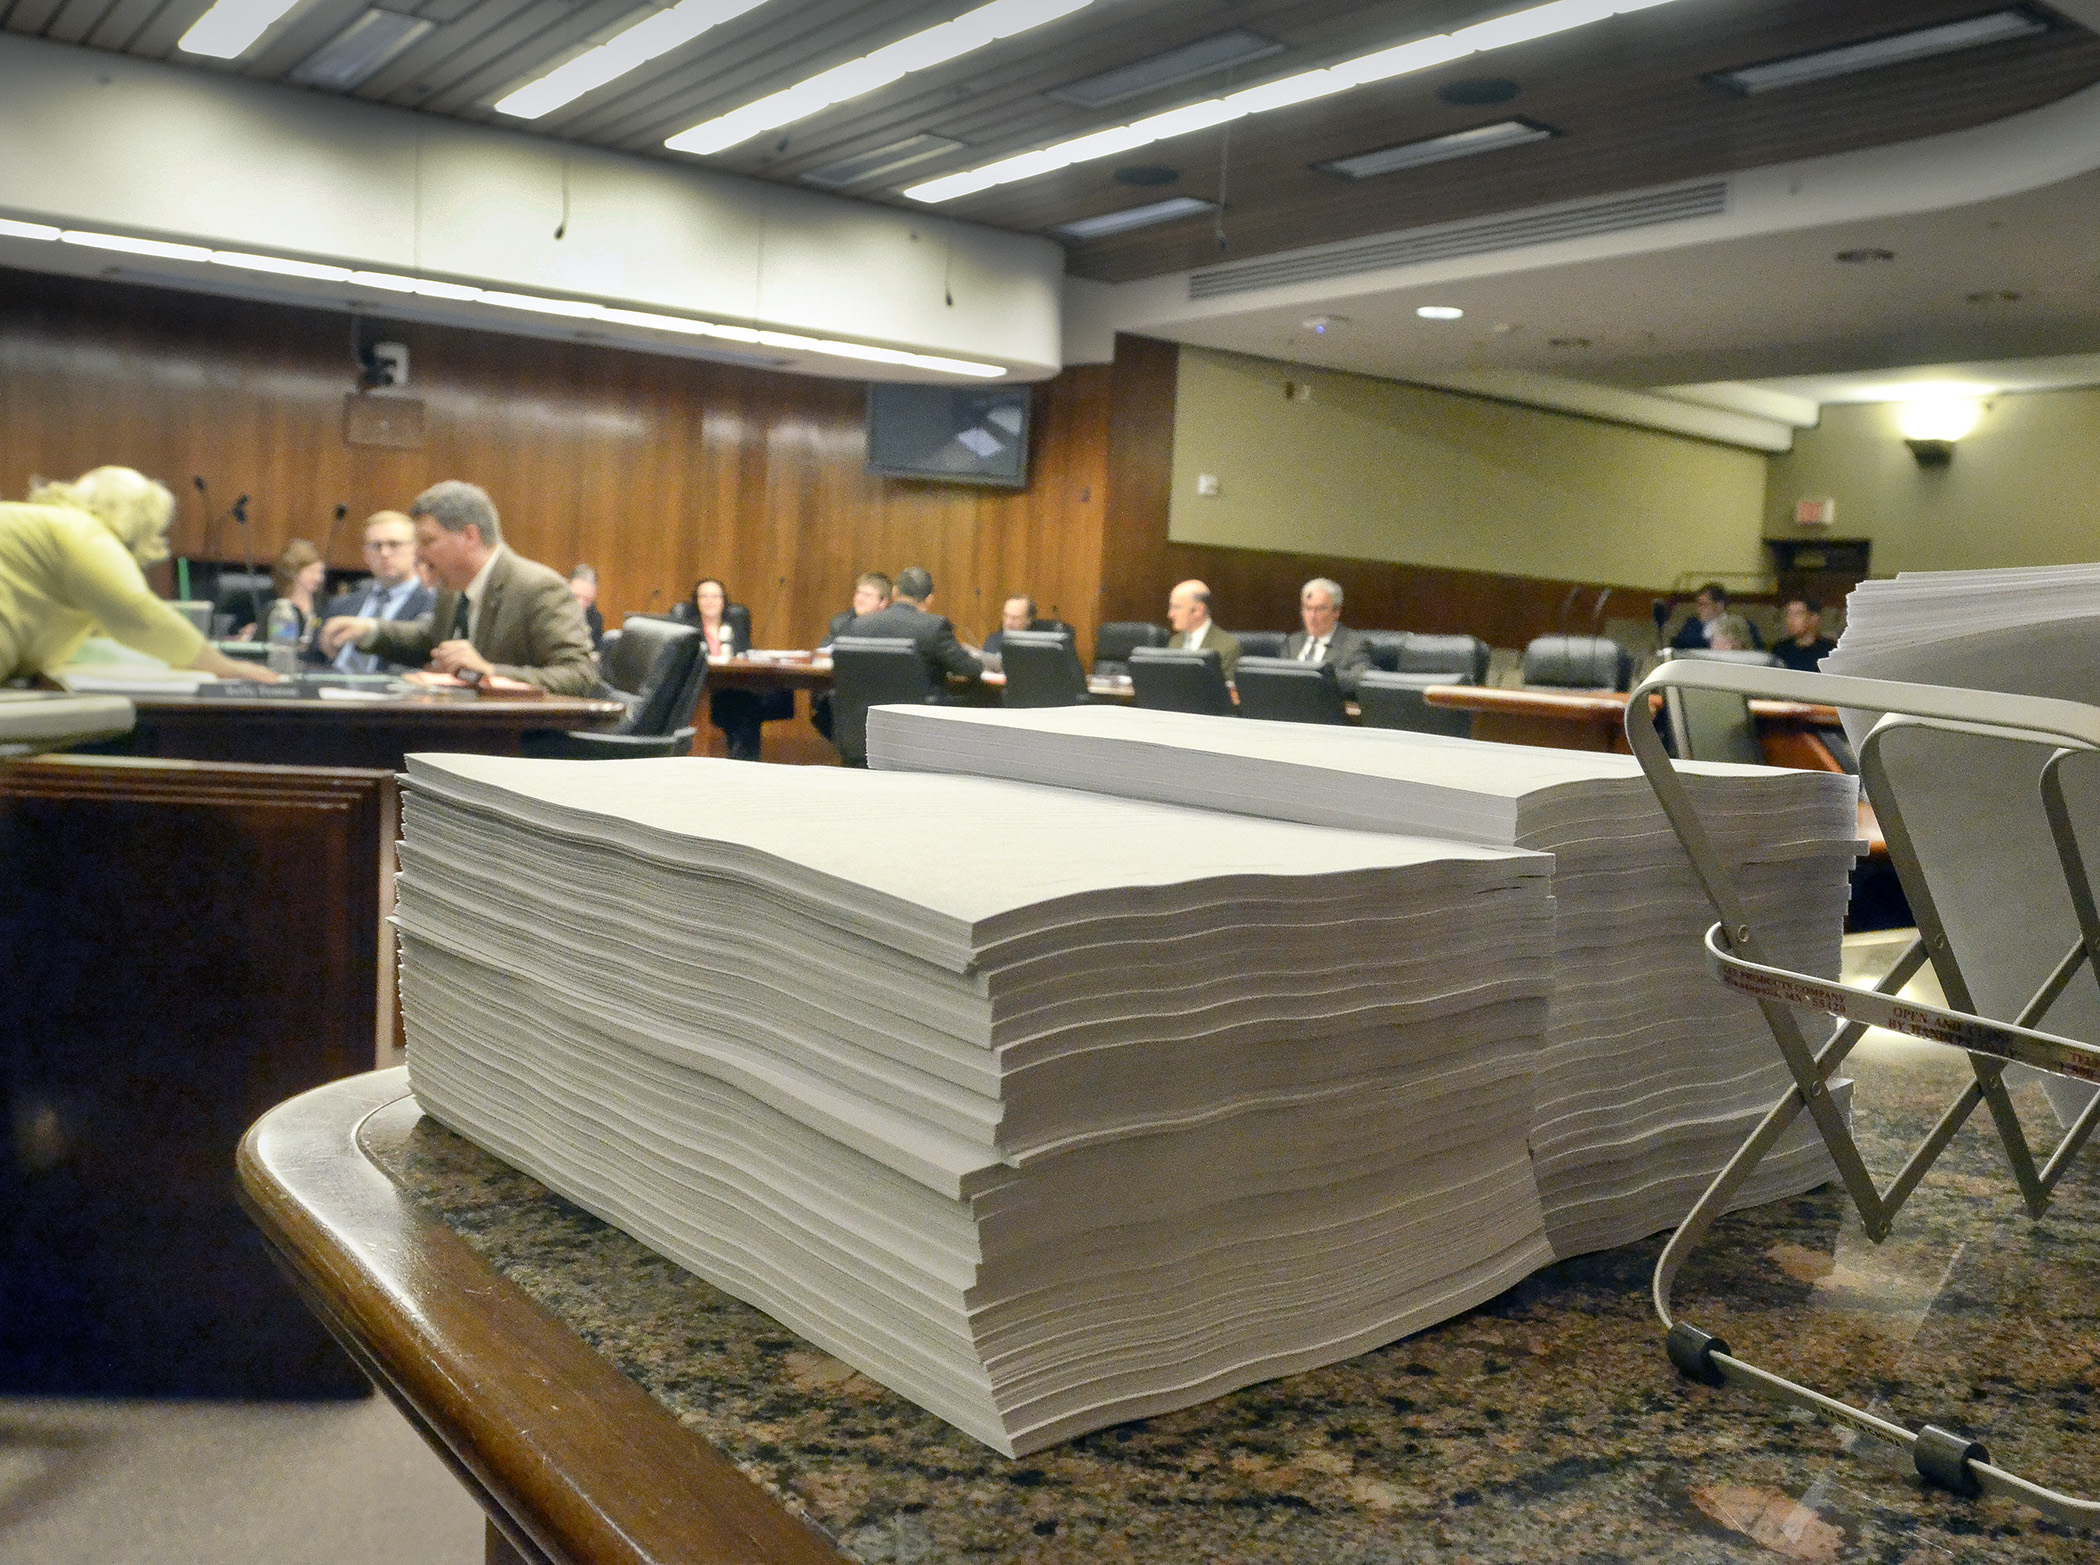 Copies of the omnibus environment finance bill await distribution prior to an April 14 House Environment and Natural Resources Policy and Finance Committee walk-through. Photo by Andrew VonBank